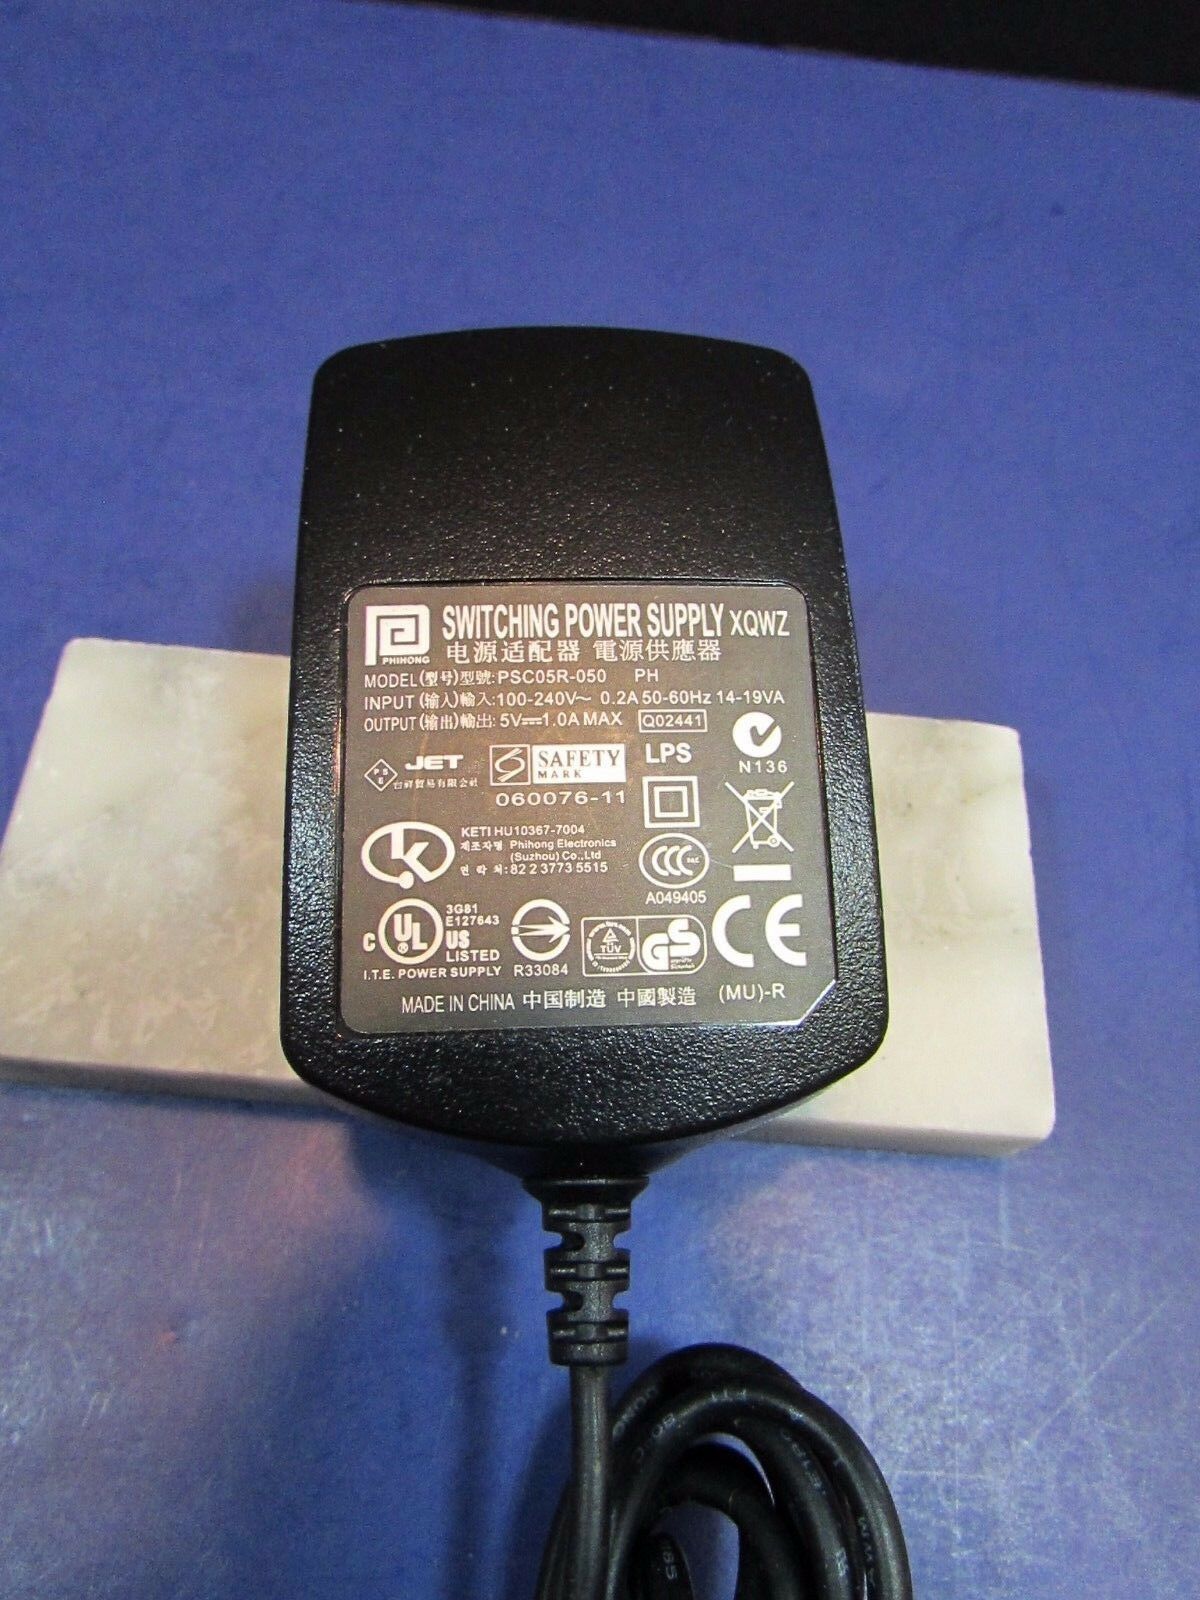 New PHIHONG PSC05R-050 5V 1.0A 1A SWITCHING POWER SUPPLY AC ADAPTER - Click Image to Close